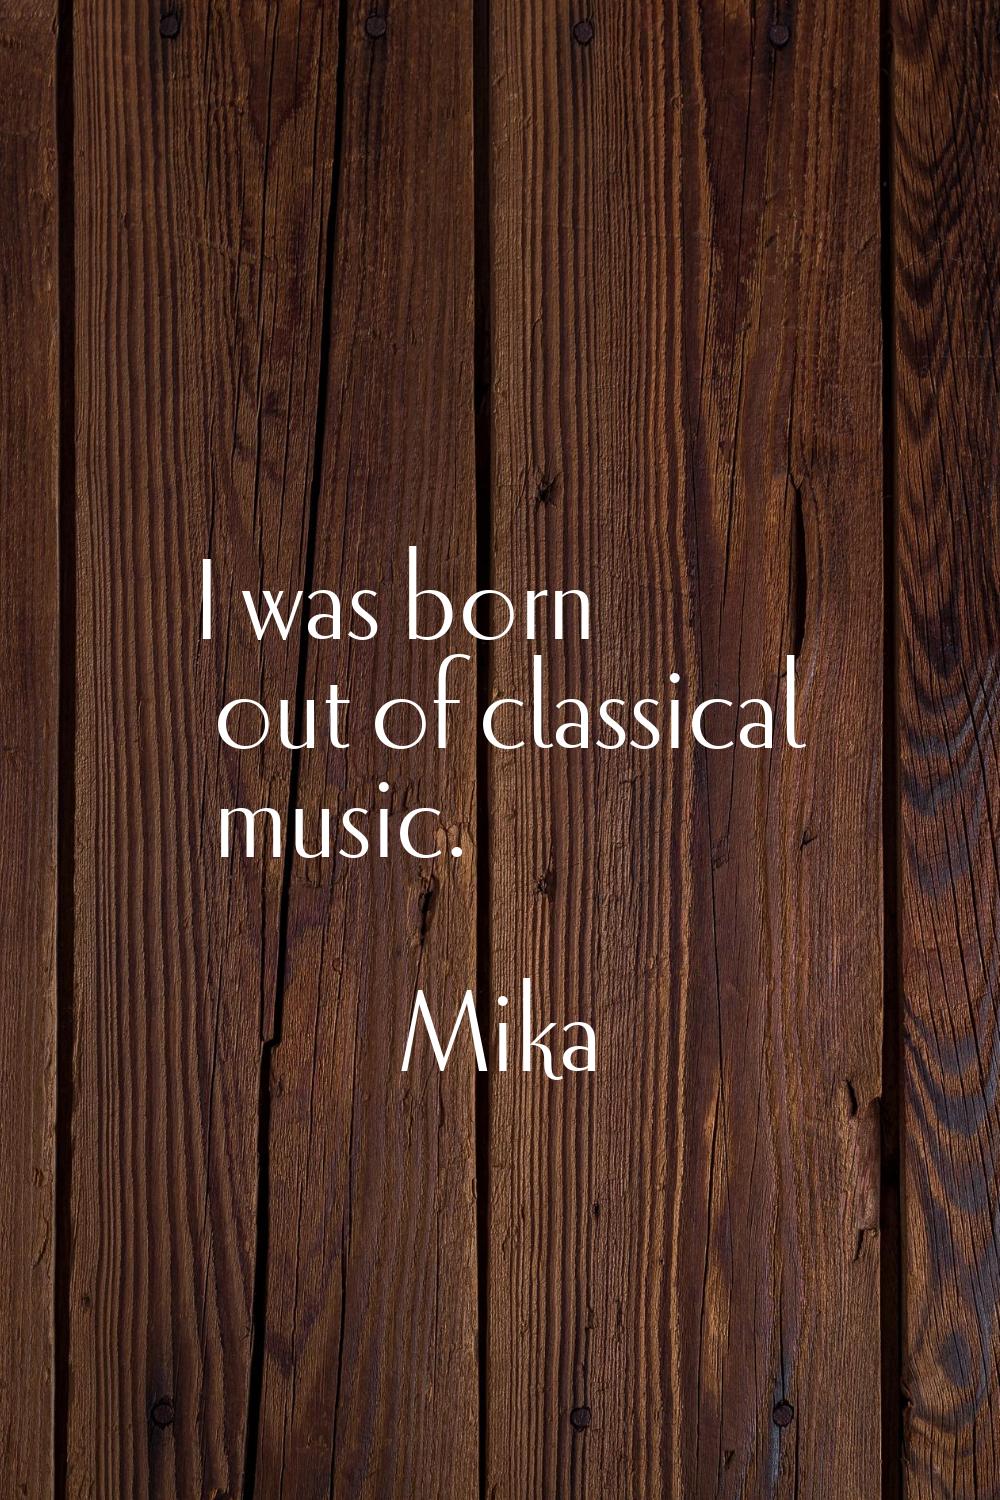 I was born out of classical music.